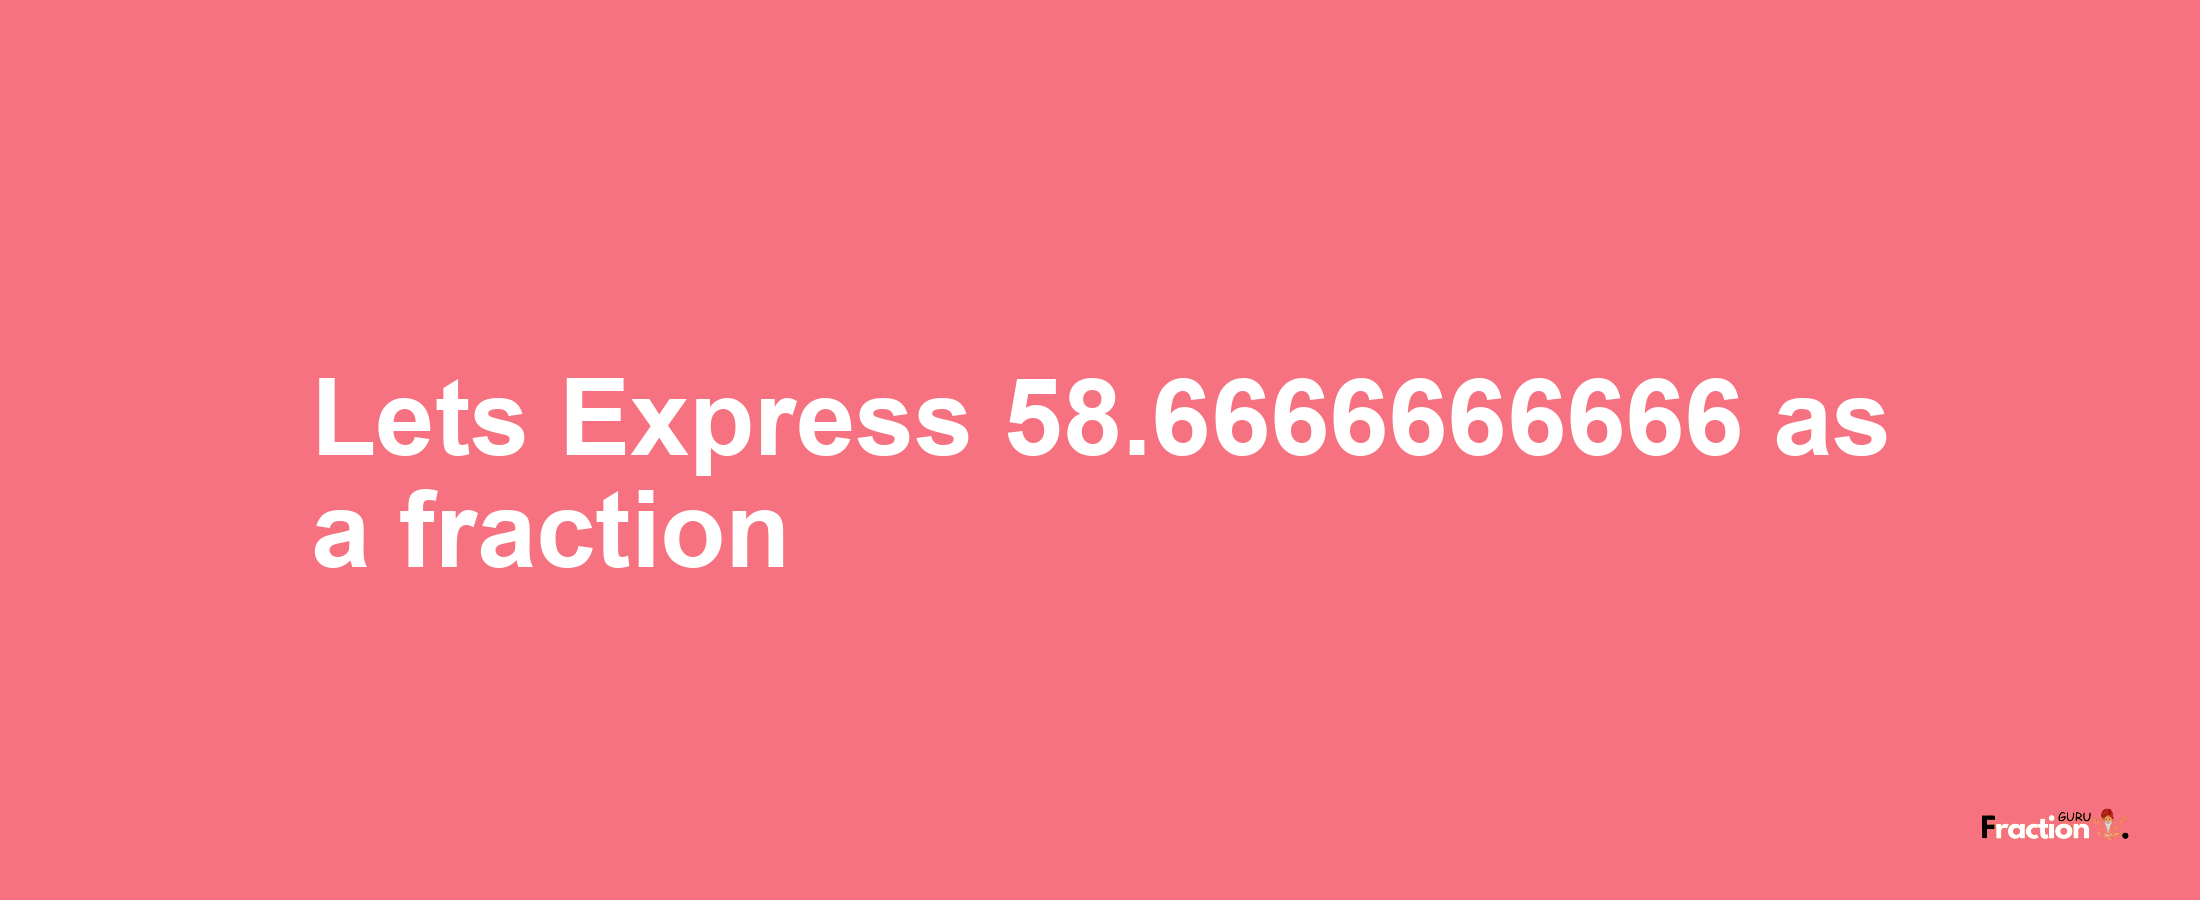 Lets Express 58.6666666666 as afraction